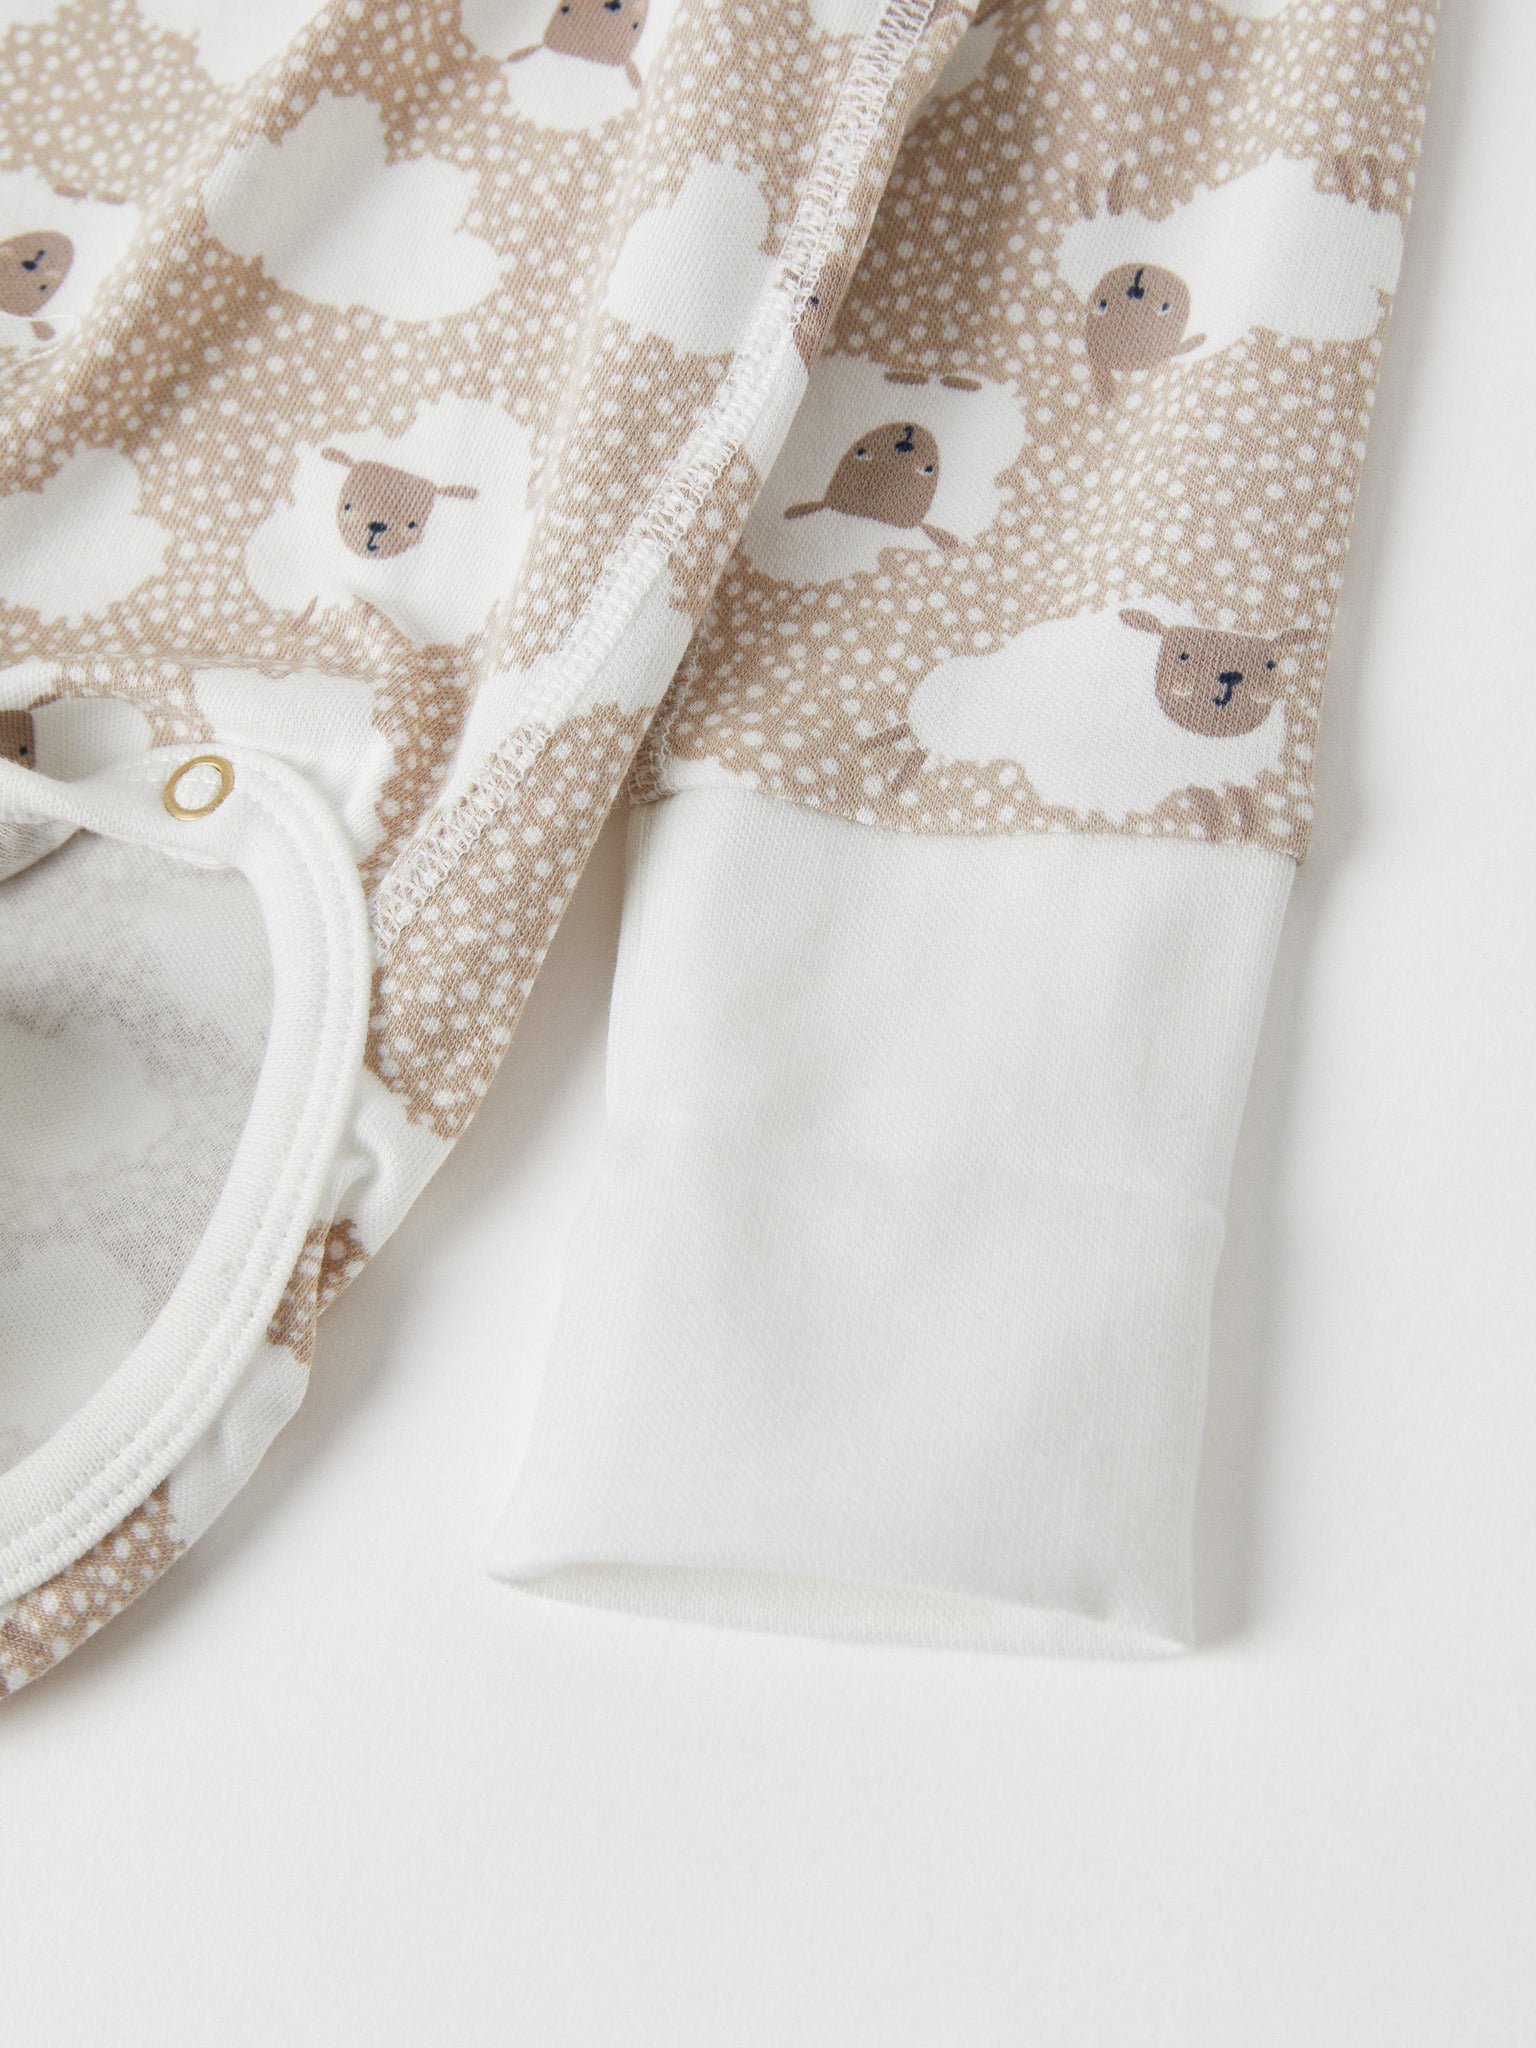 Bunny Print Organic Cotton Babygrow from the Polarn O. Pyret baby collection. Ethically produced baby clothing.